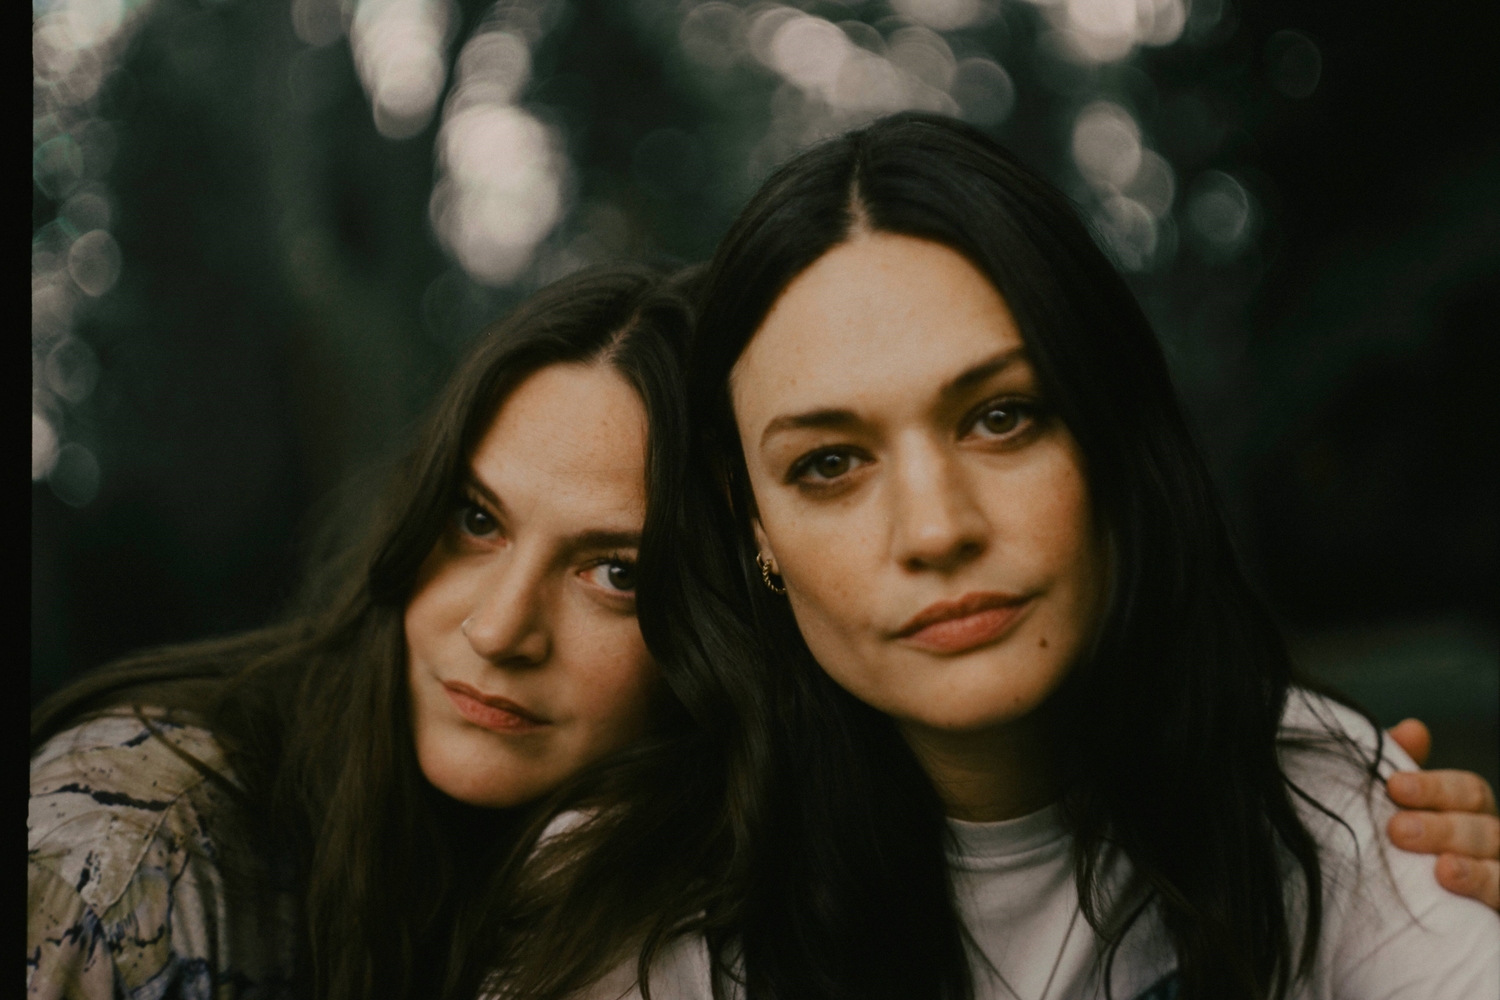 The Staves are back with new track ‘You Held It All’